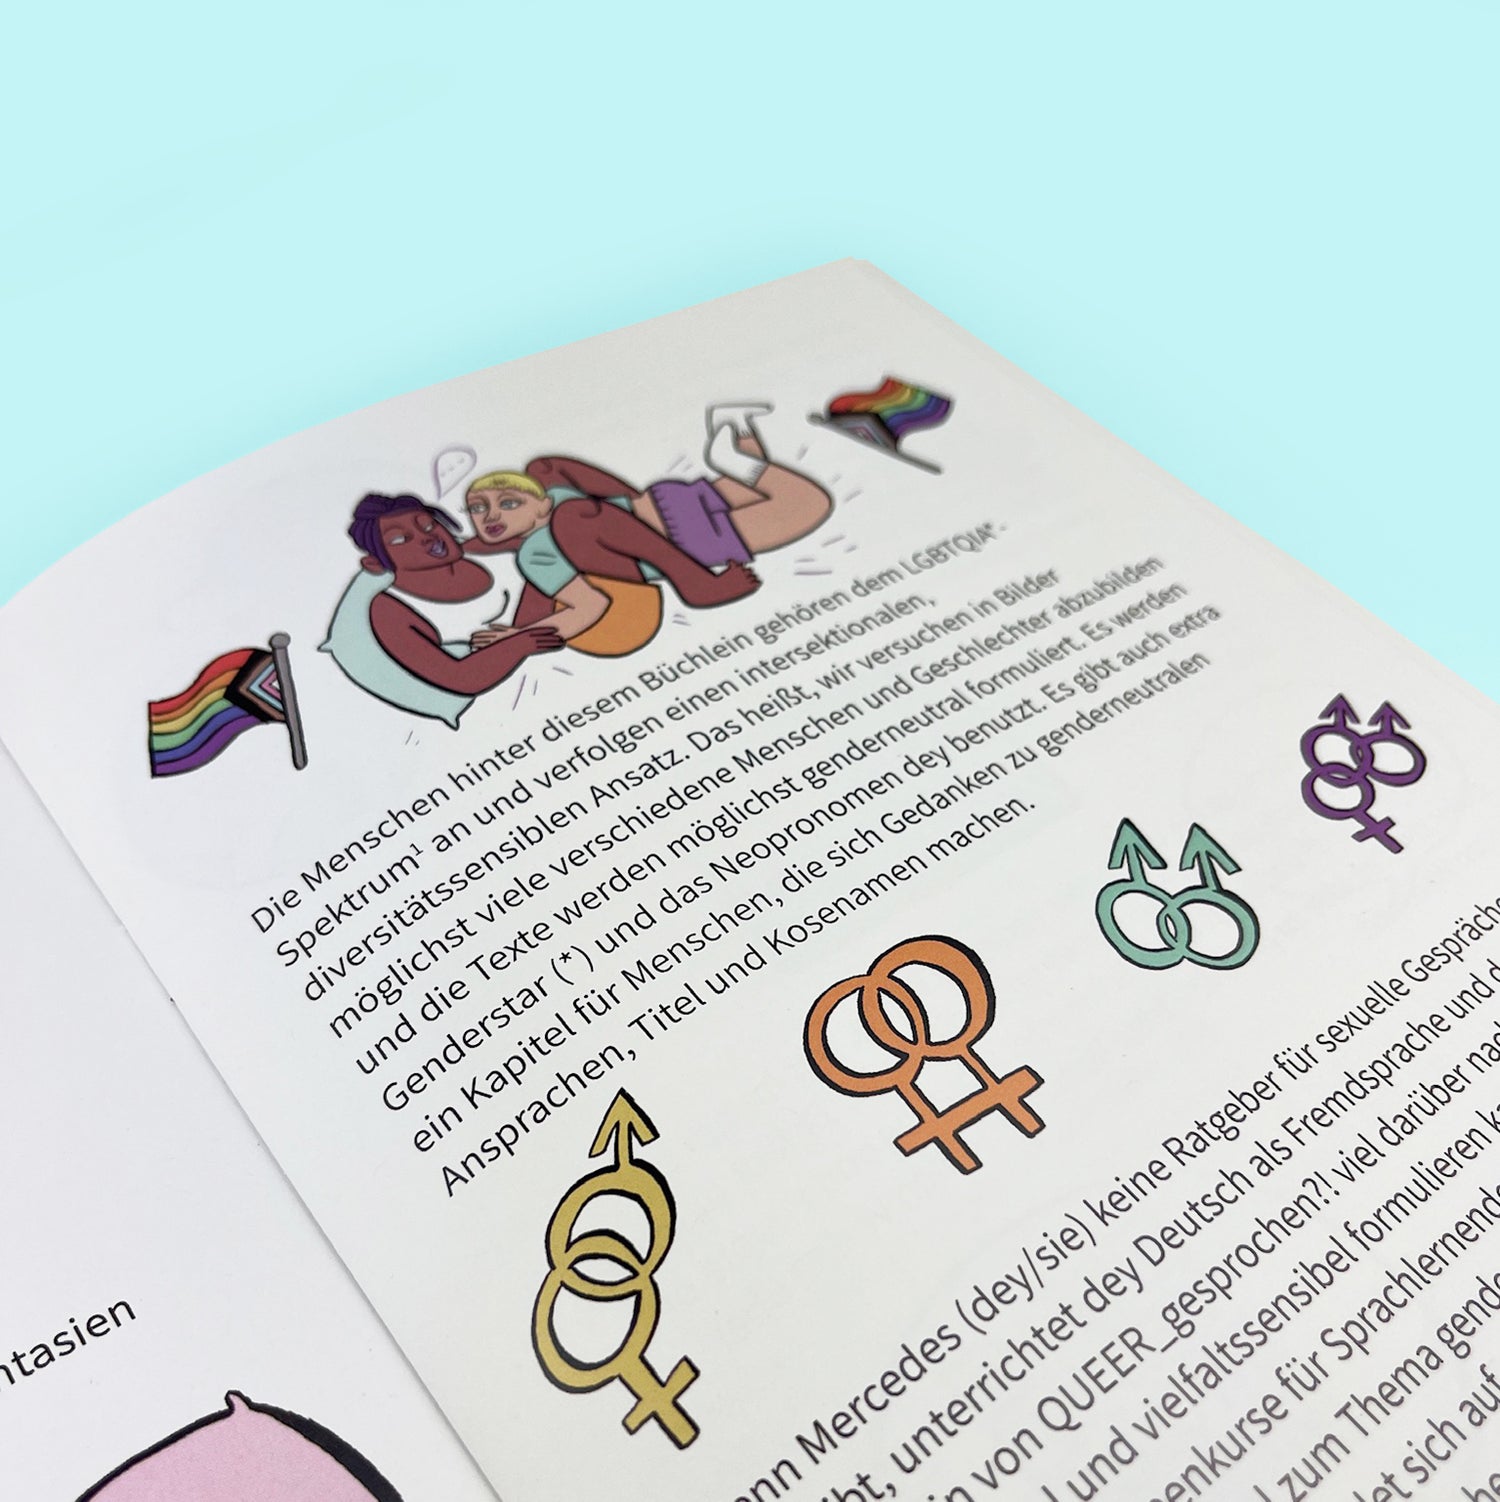 Close up of page from Bettgeflüster Workbook showing cute queer characters snuggling, inclusive pride flags, and a spectrum of gender pairing symbols.